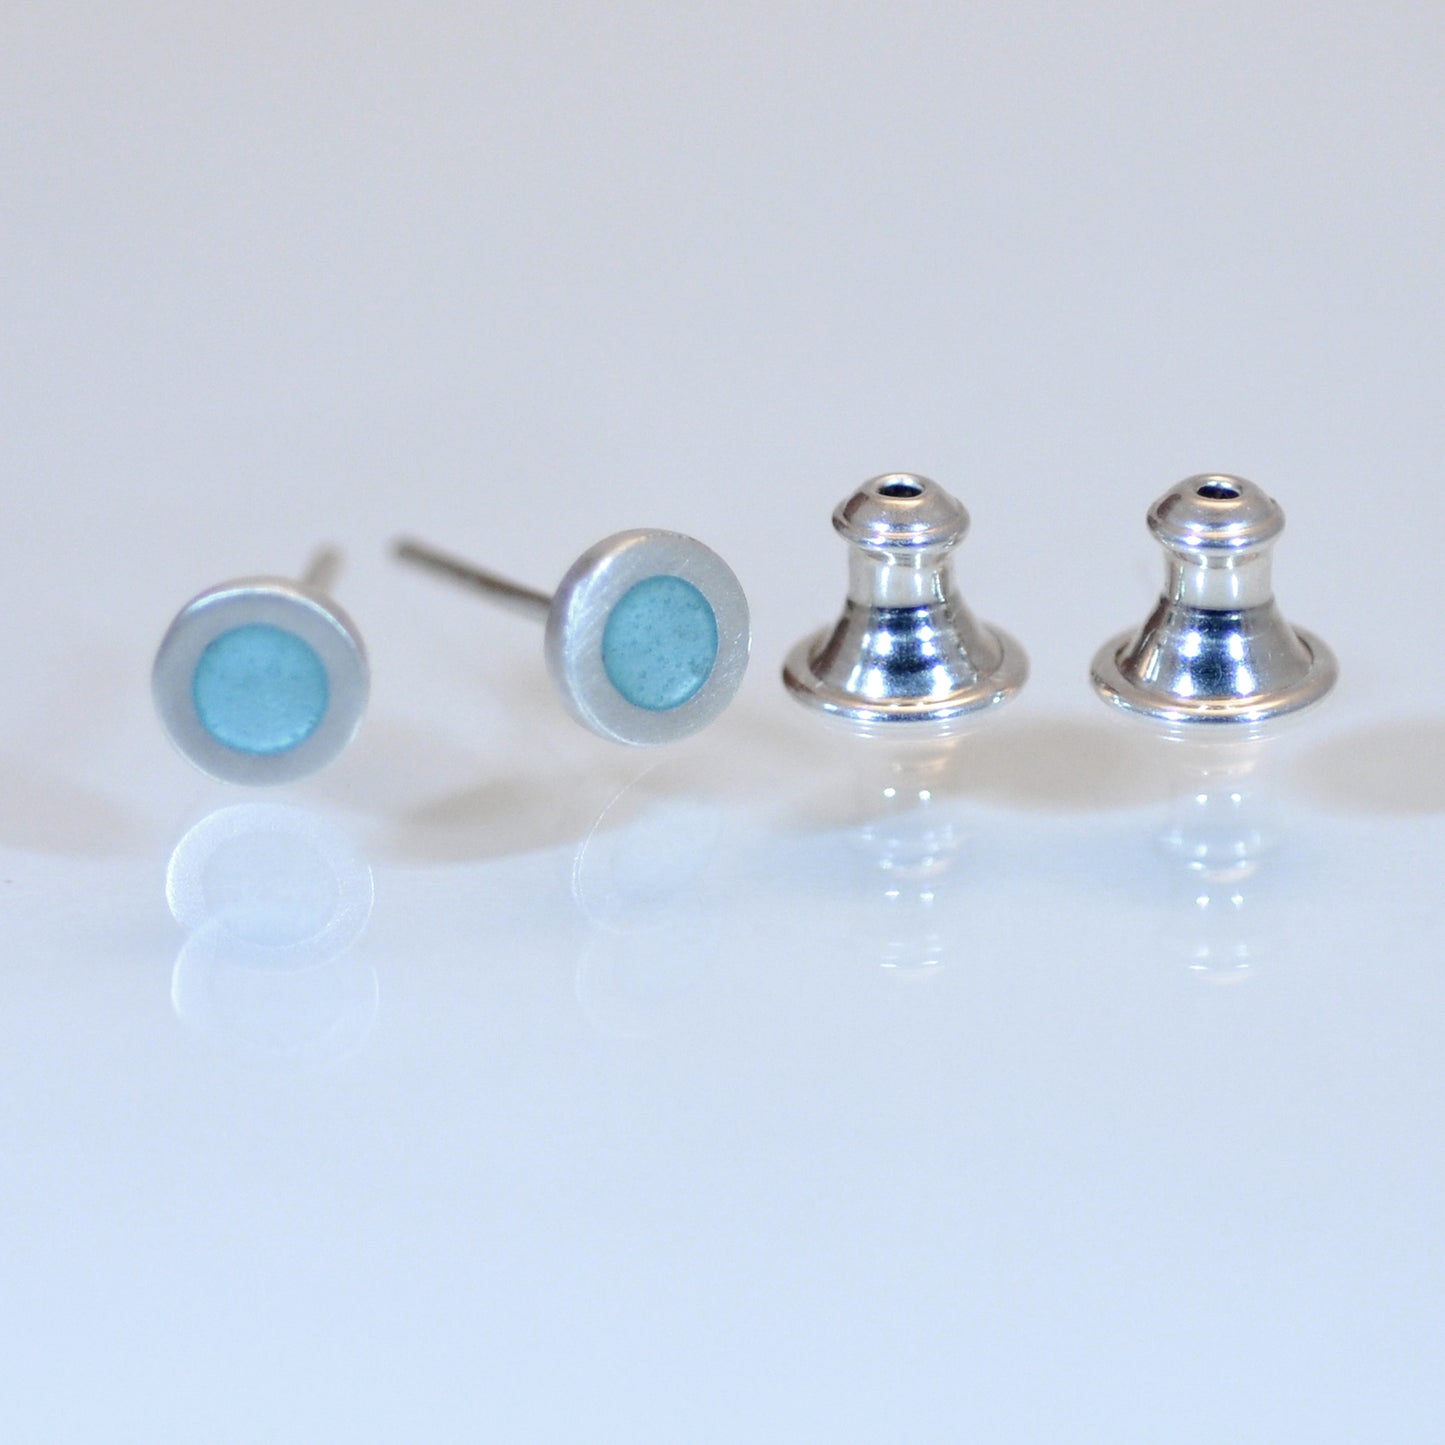 Tiny Round silver and enamel ear studs, this colour light turquoise blue